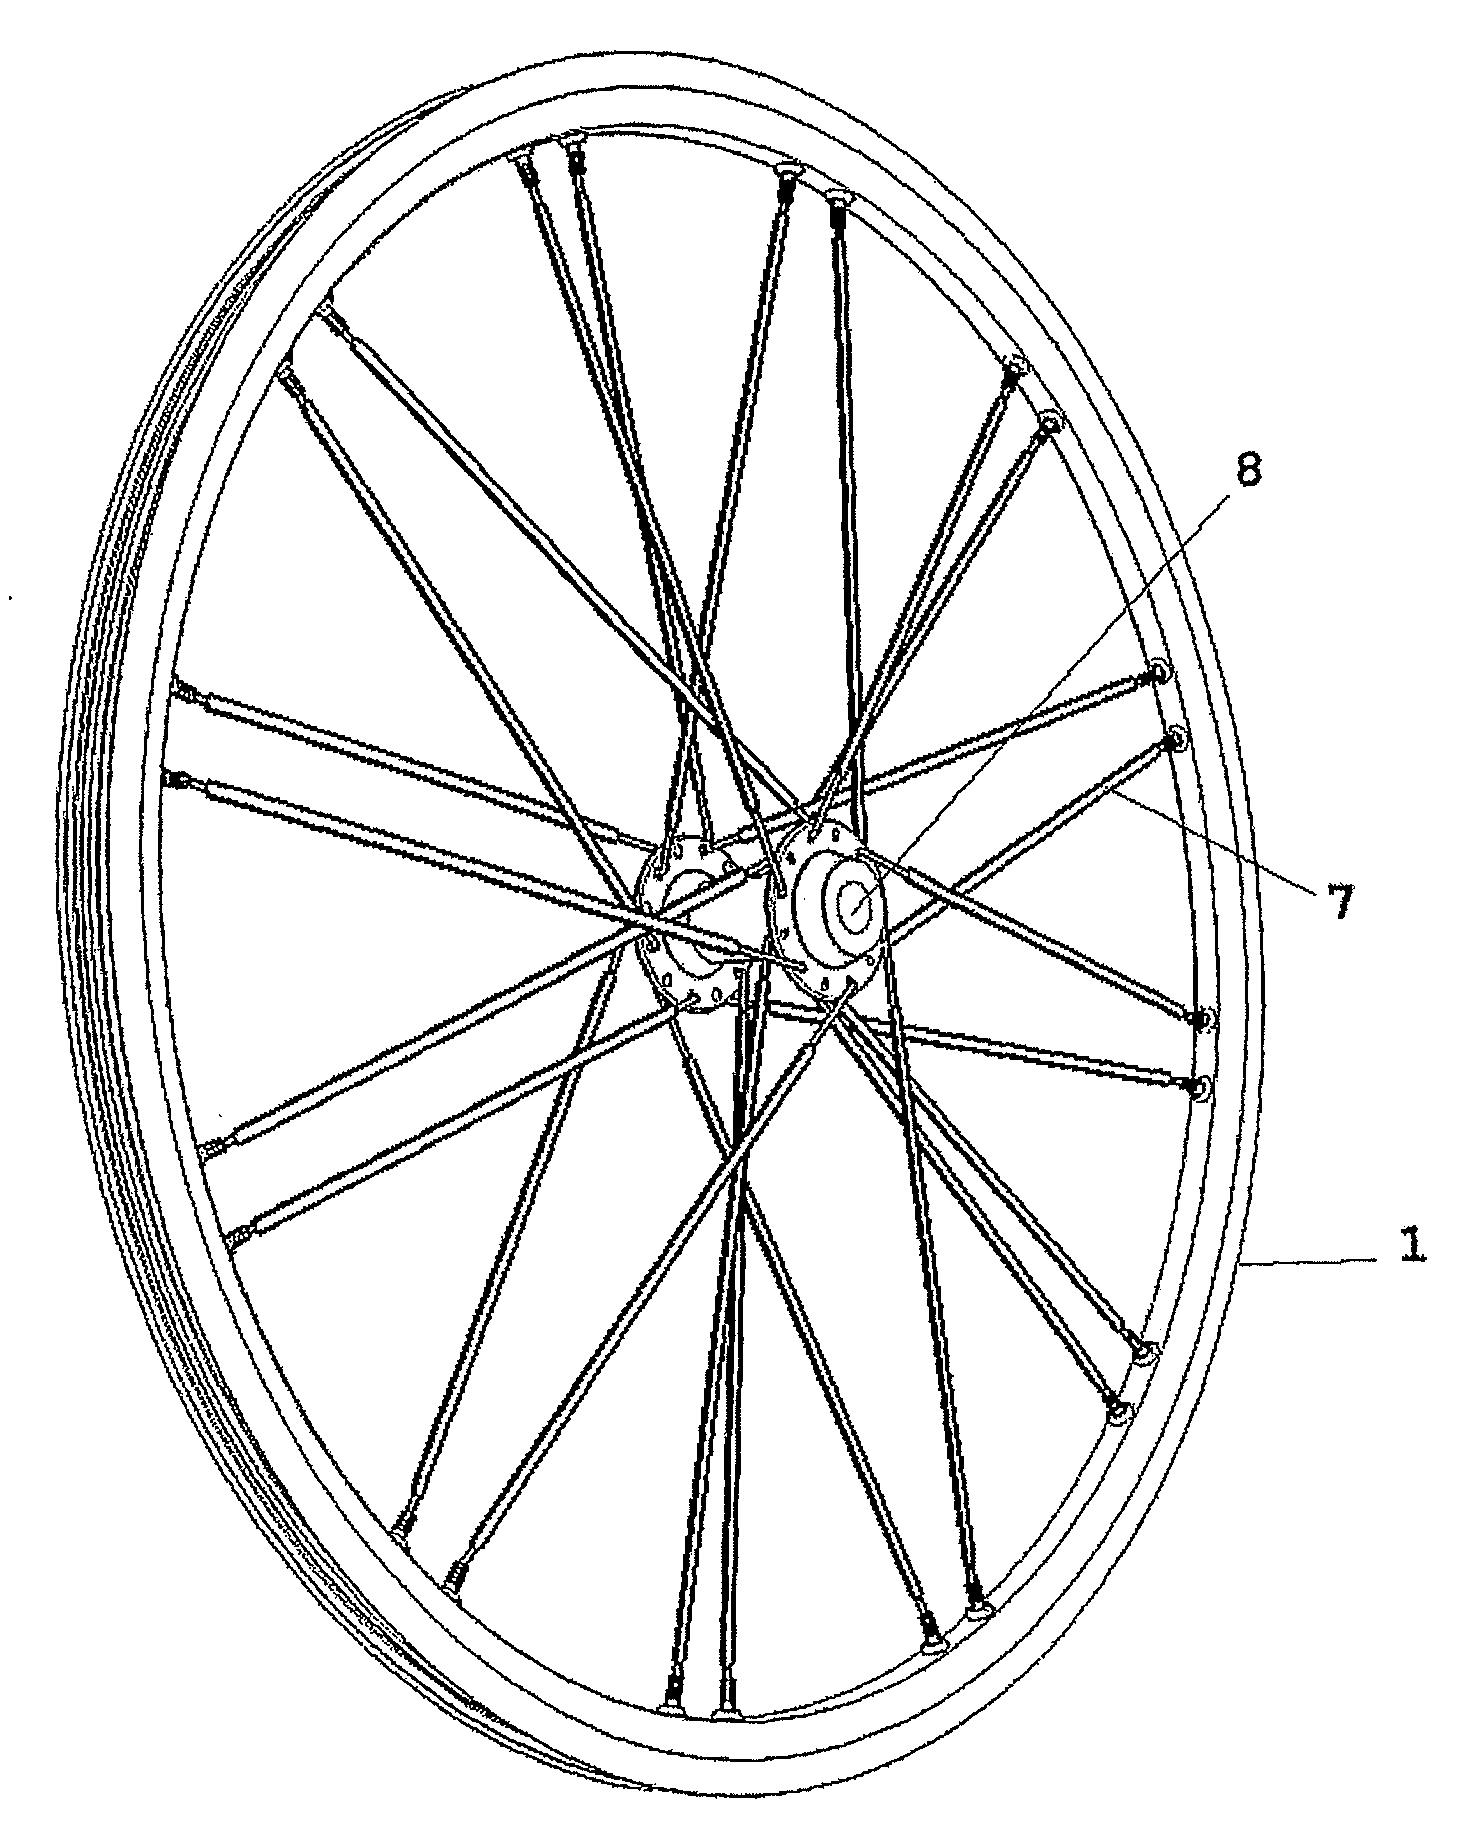 Bicycle Wheel with Rim for a Tubeless Tyre